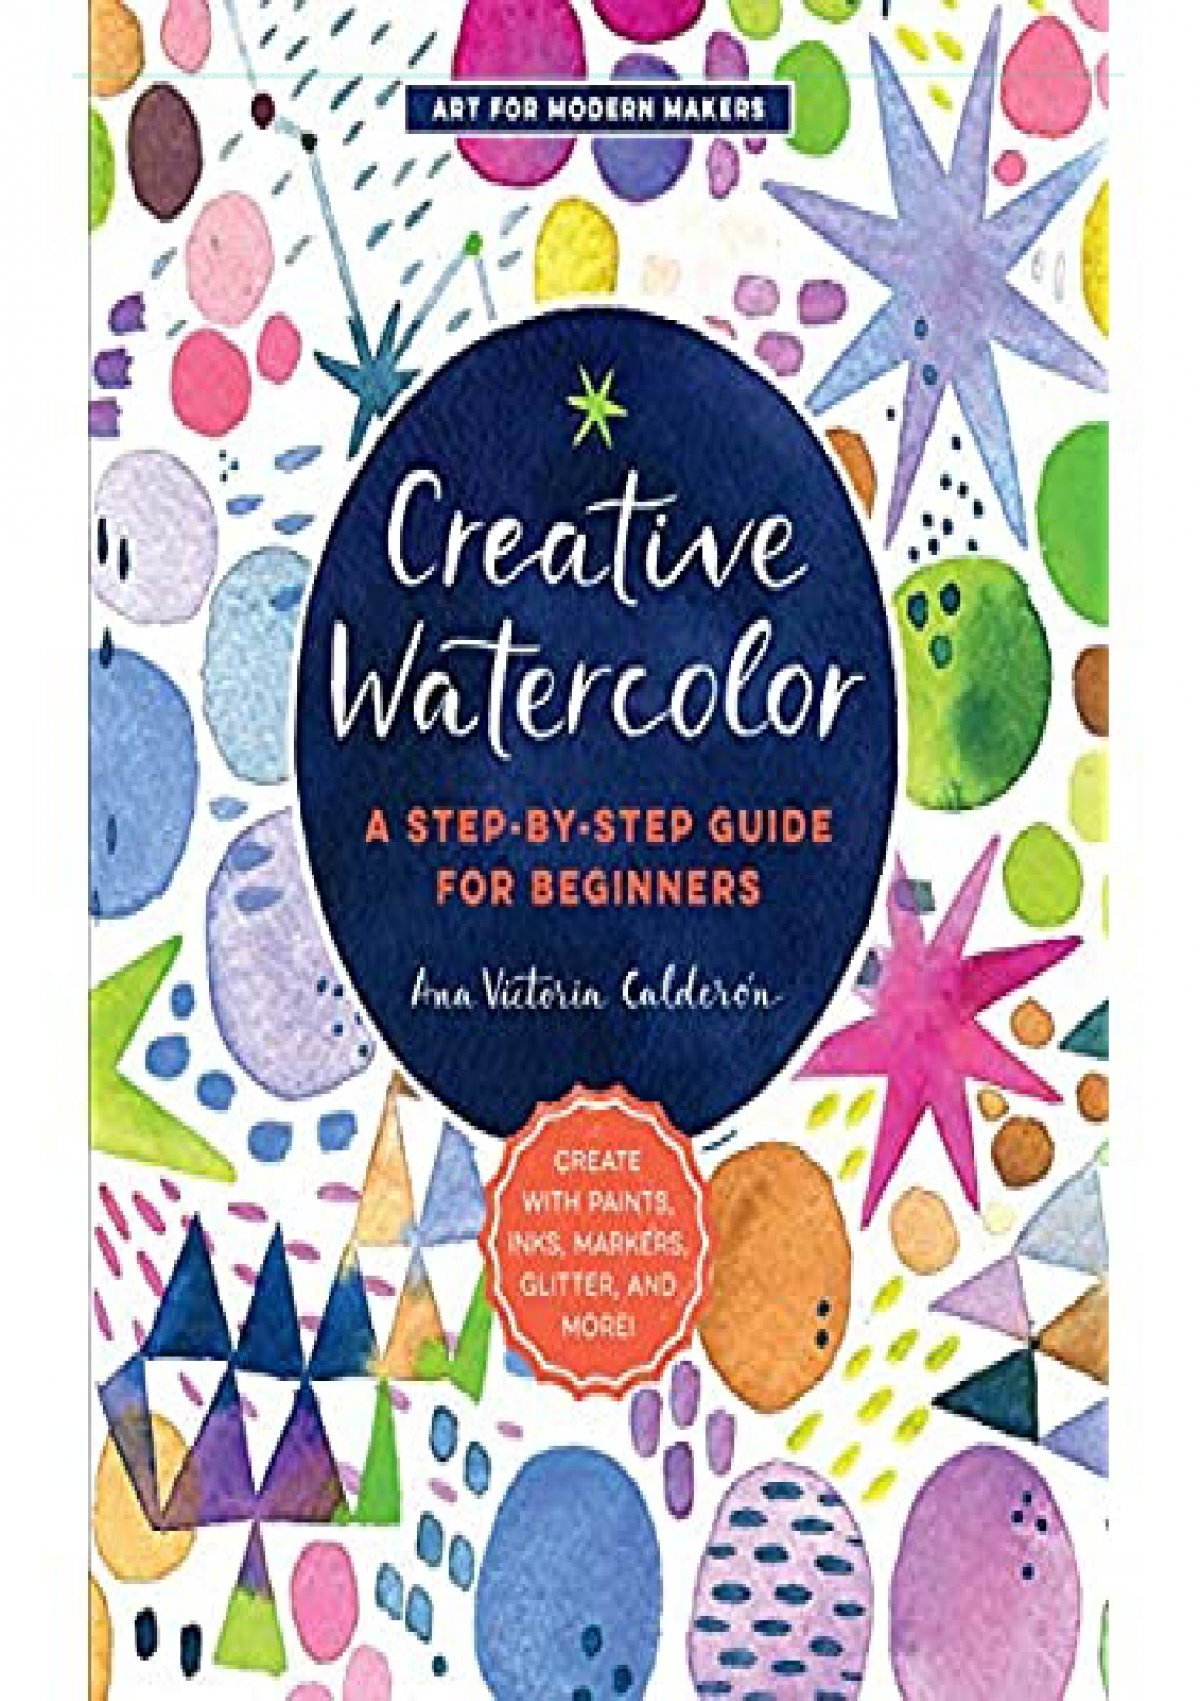 Pdf) Creative Watercolor:a Step-By-Step Guide For Beginners--Create With Paints, Inks, Markers, Glitter, And More! (Art For Modern Makers) Free